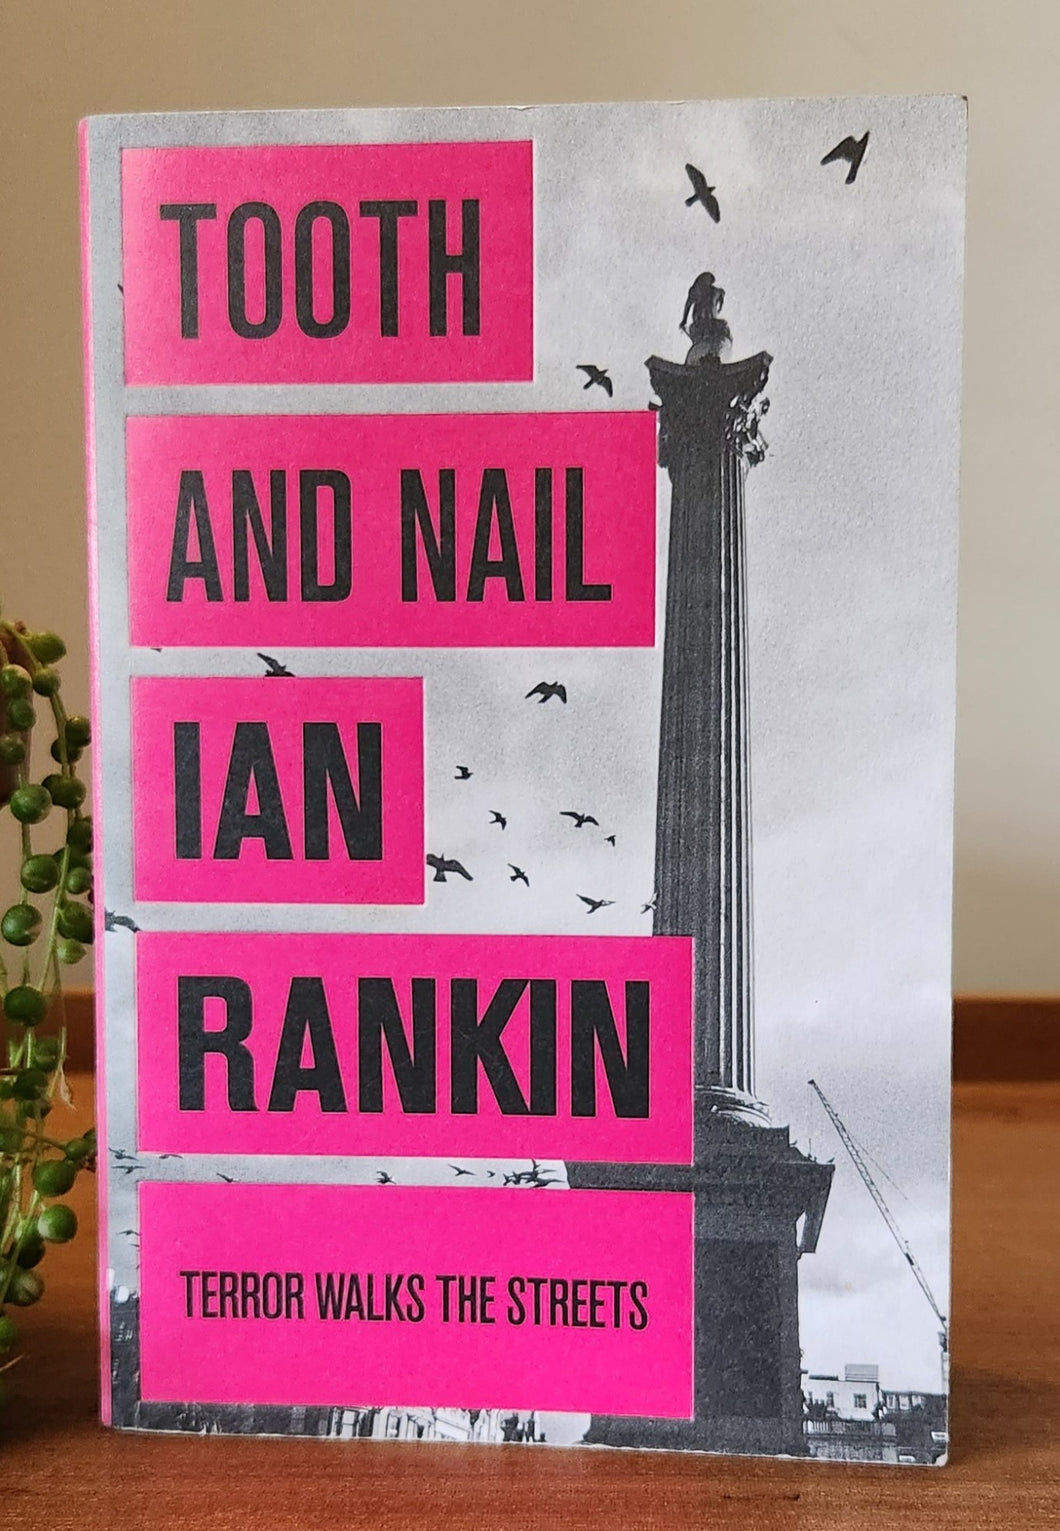 Tooth and Nail by Ian Rankin